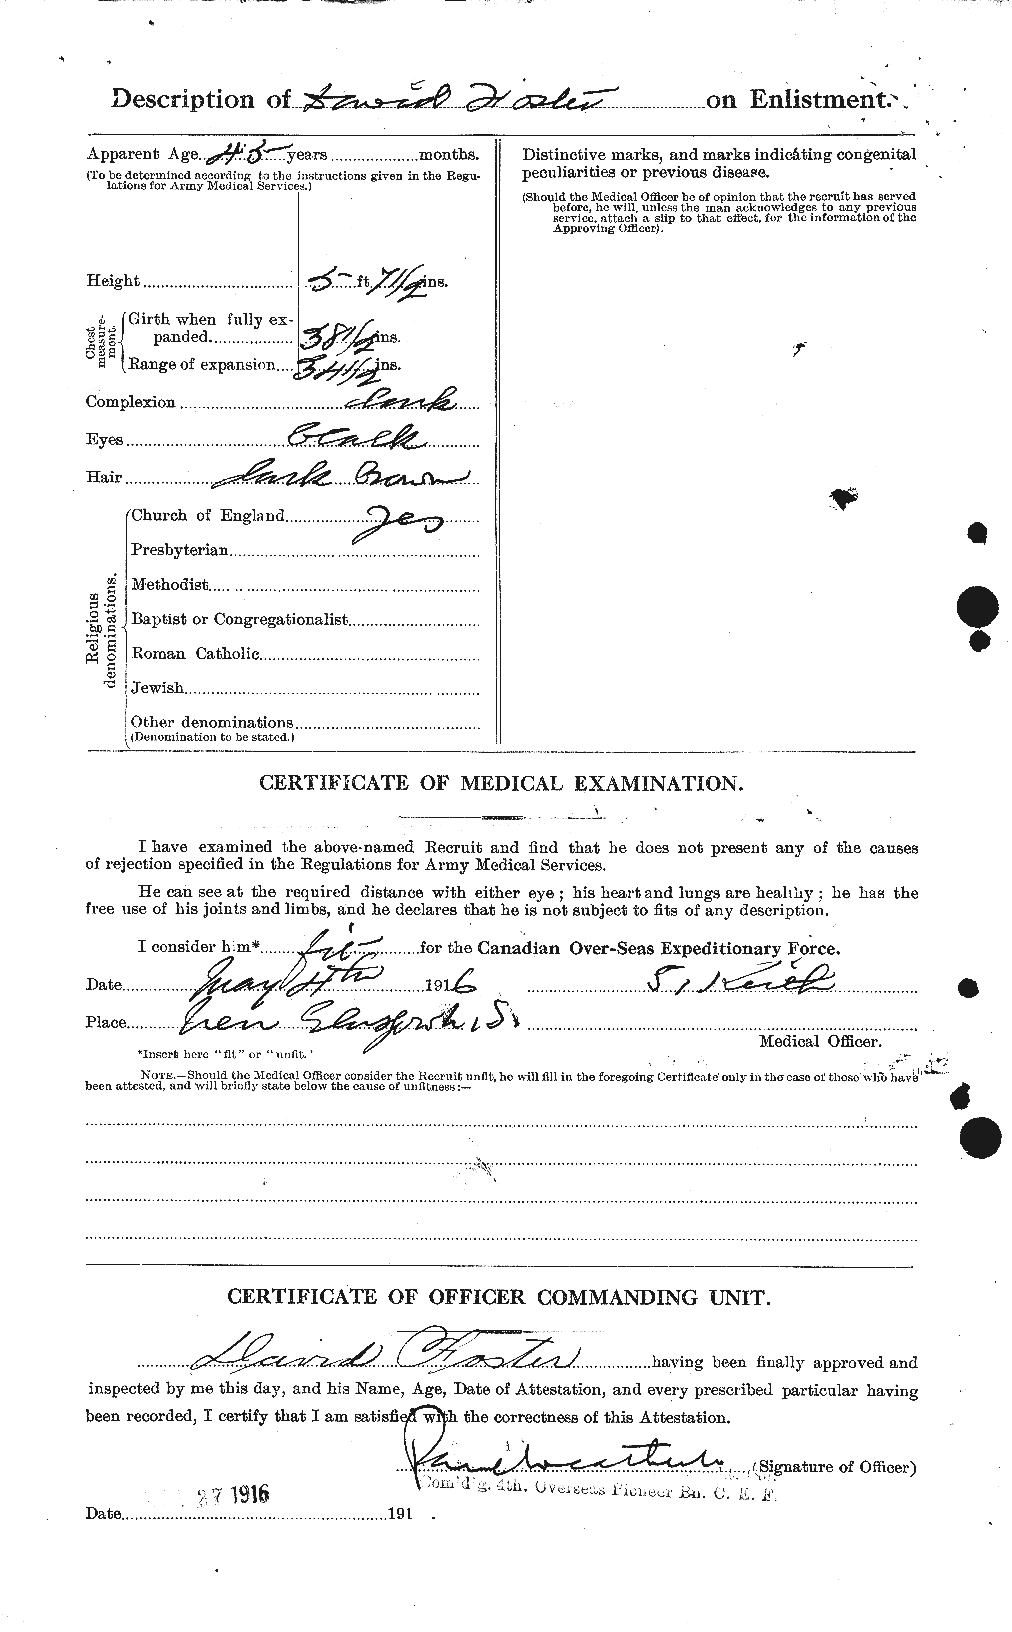 Personnel Records of the First World War - CEF 330555b